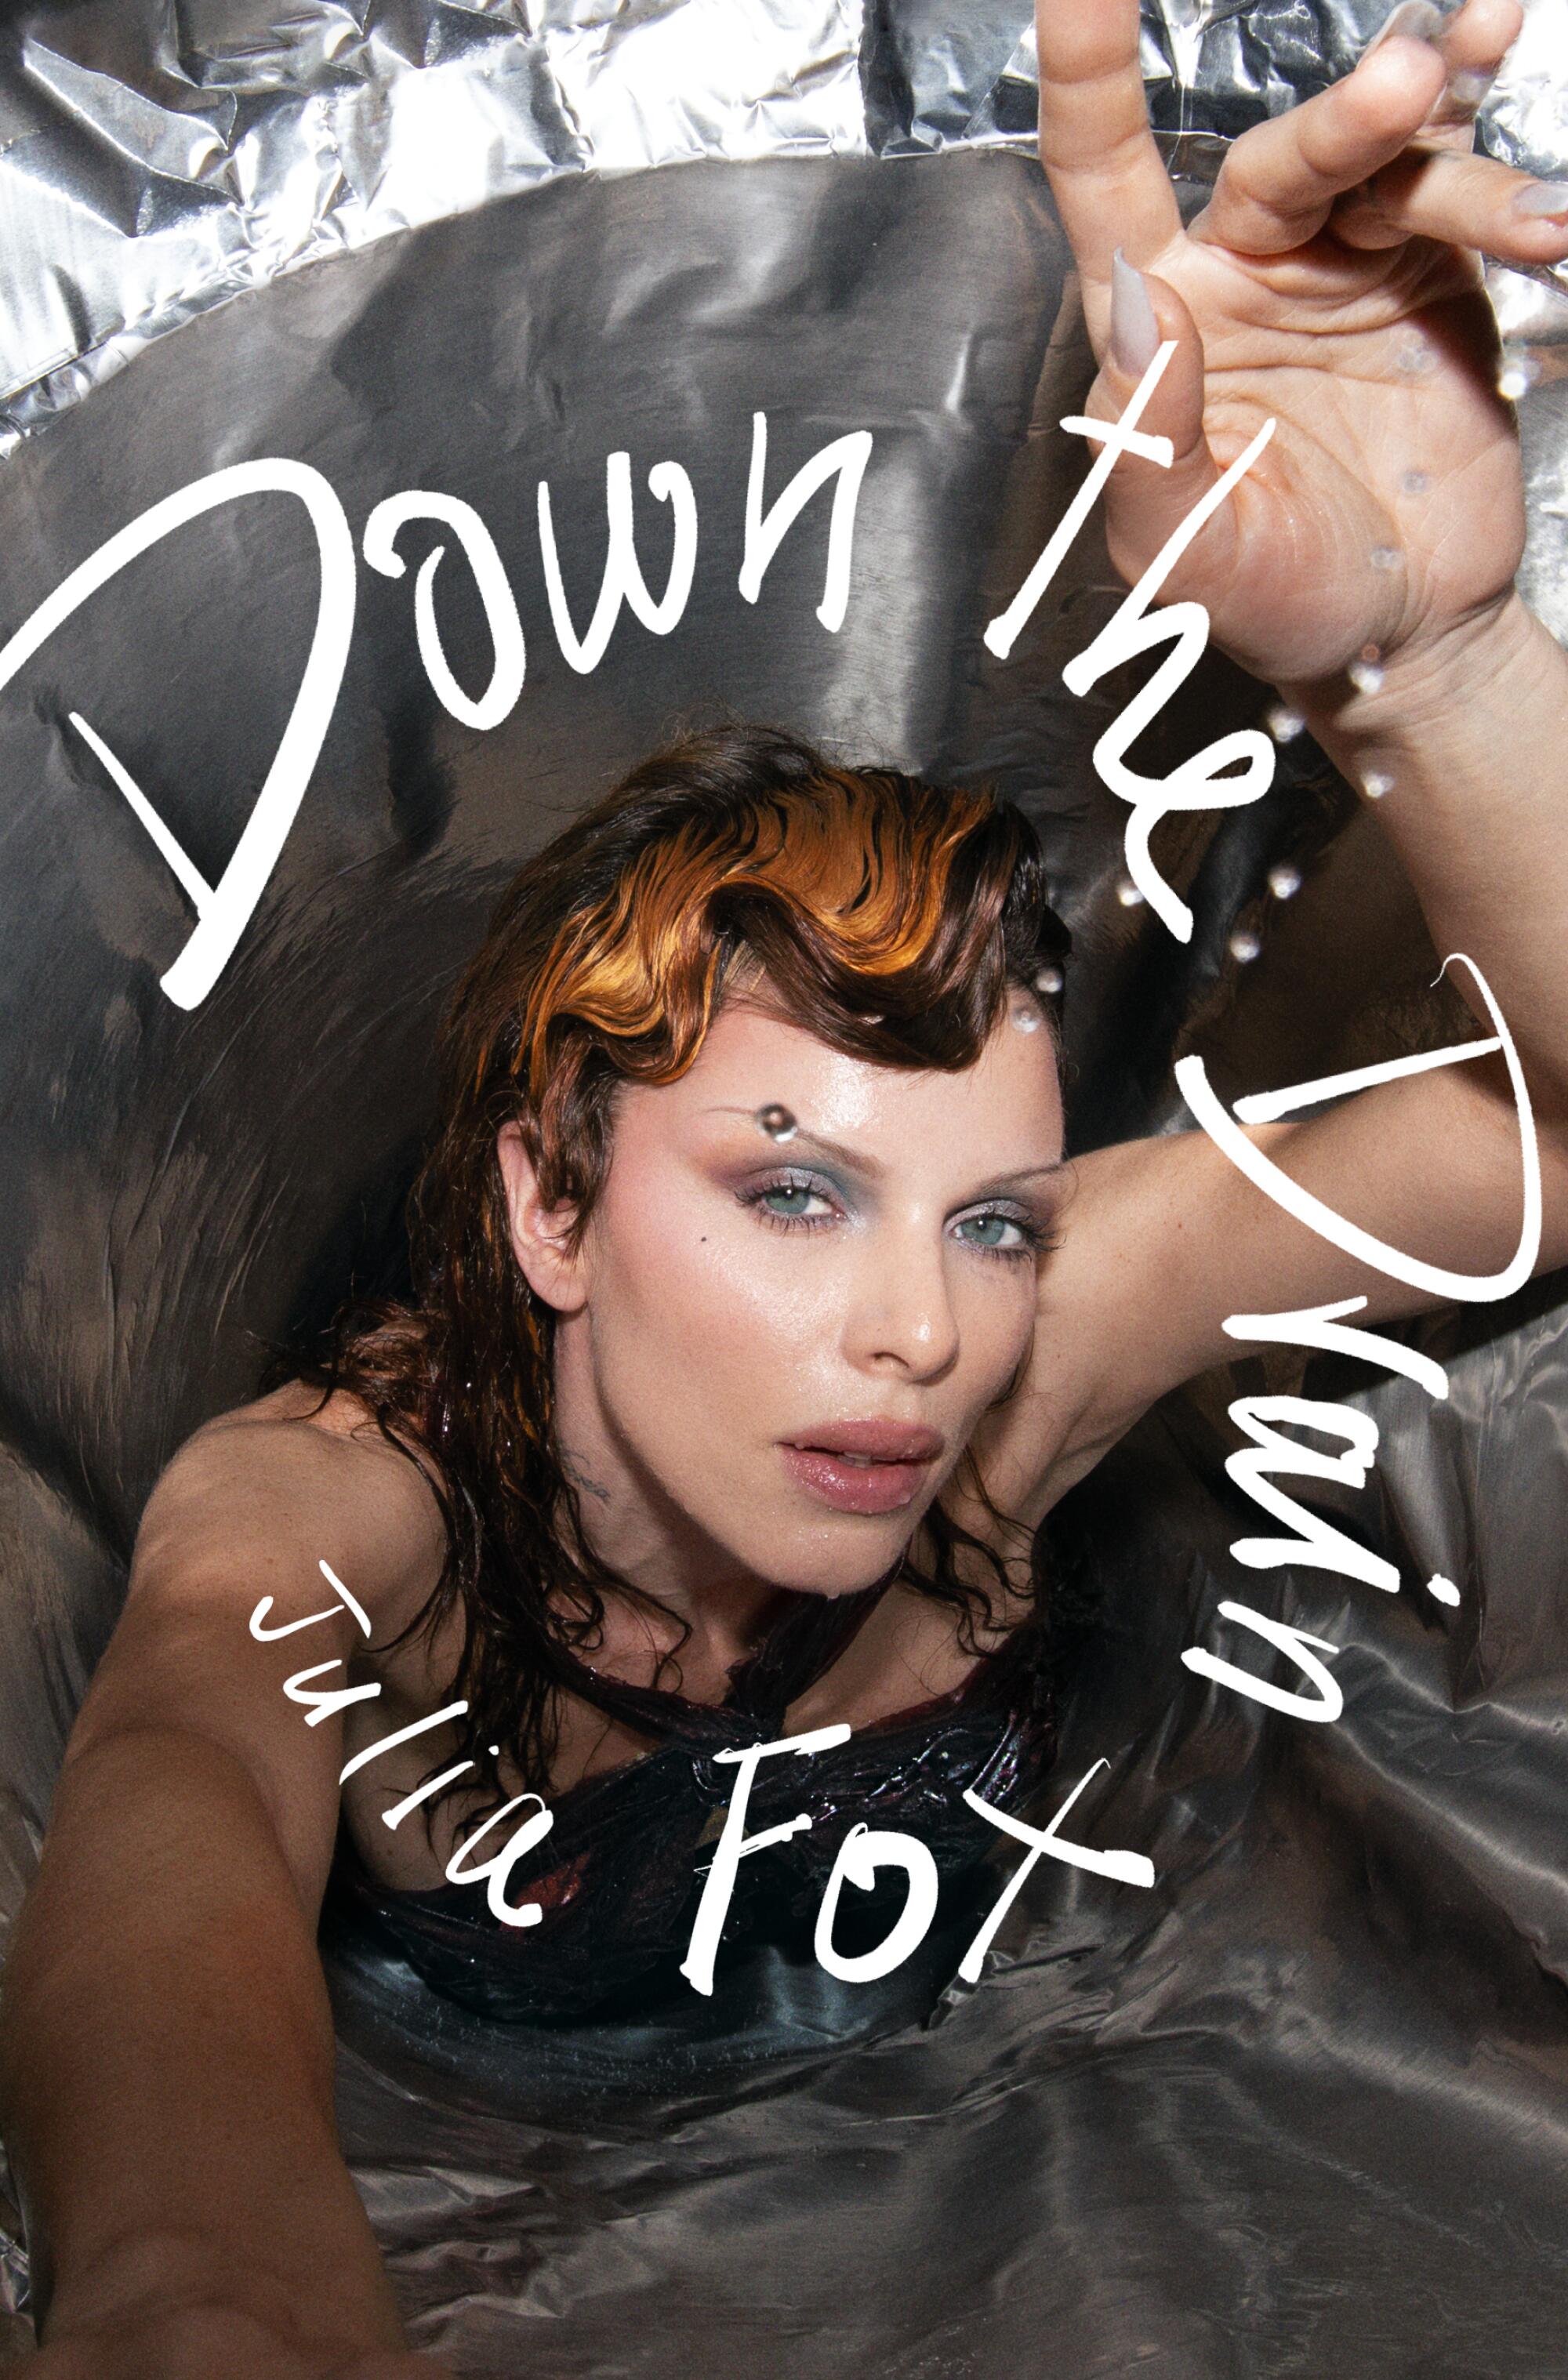 Book cover of "Down the Drain" by Julia Fox